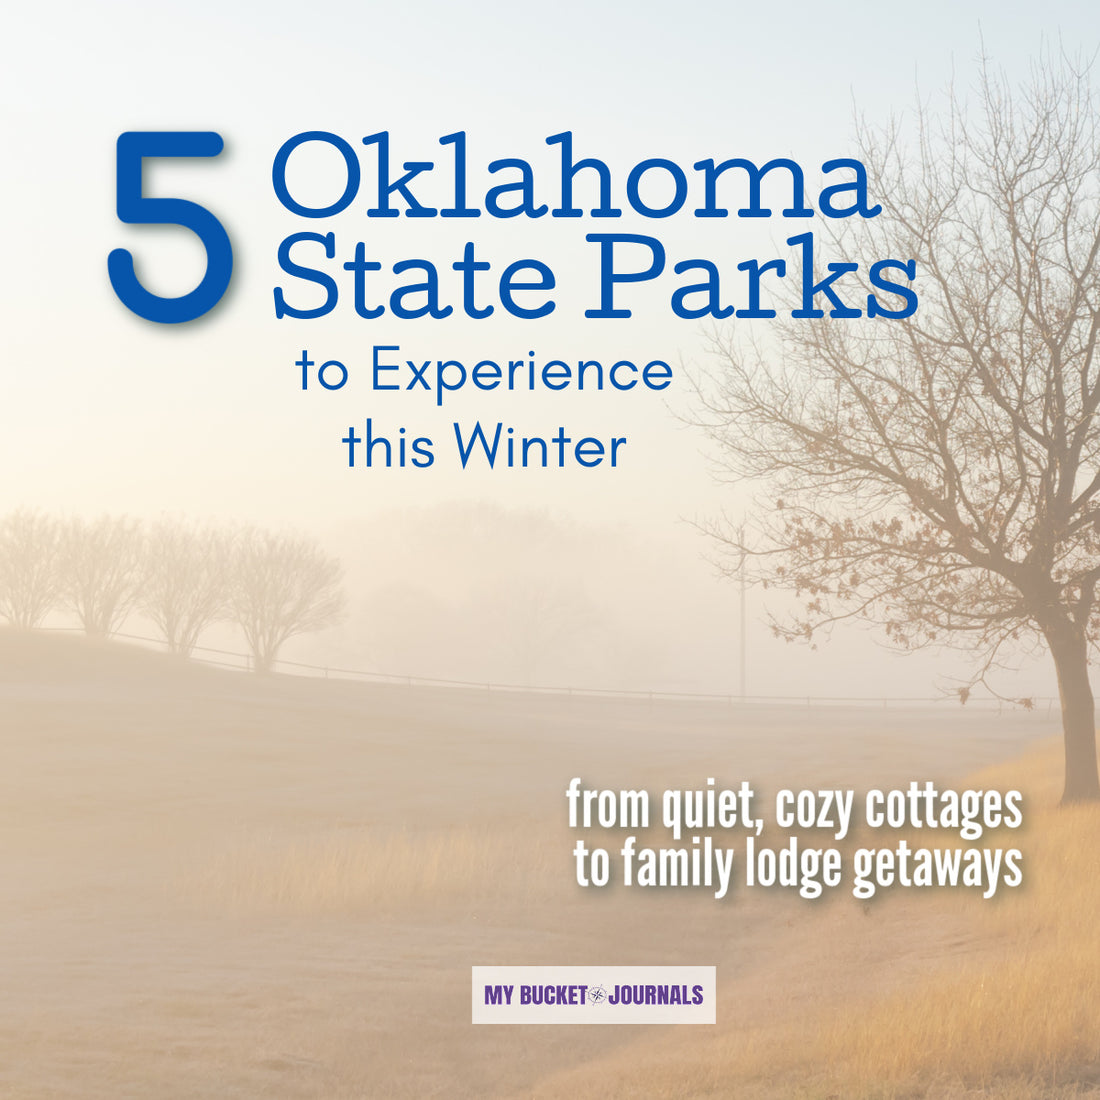 5 Oklahoma State Parks to Experience this Winter